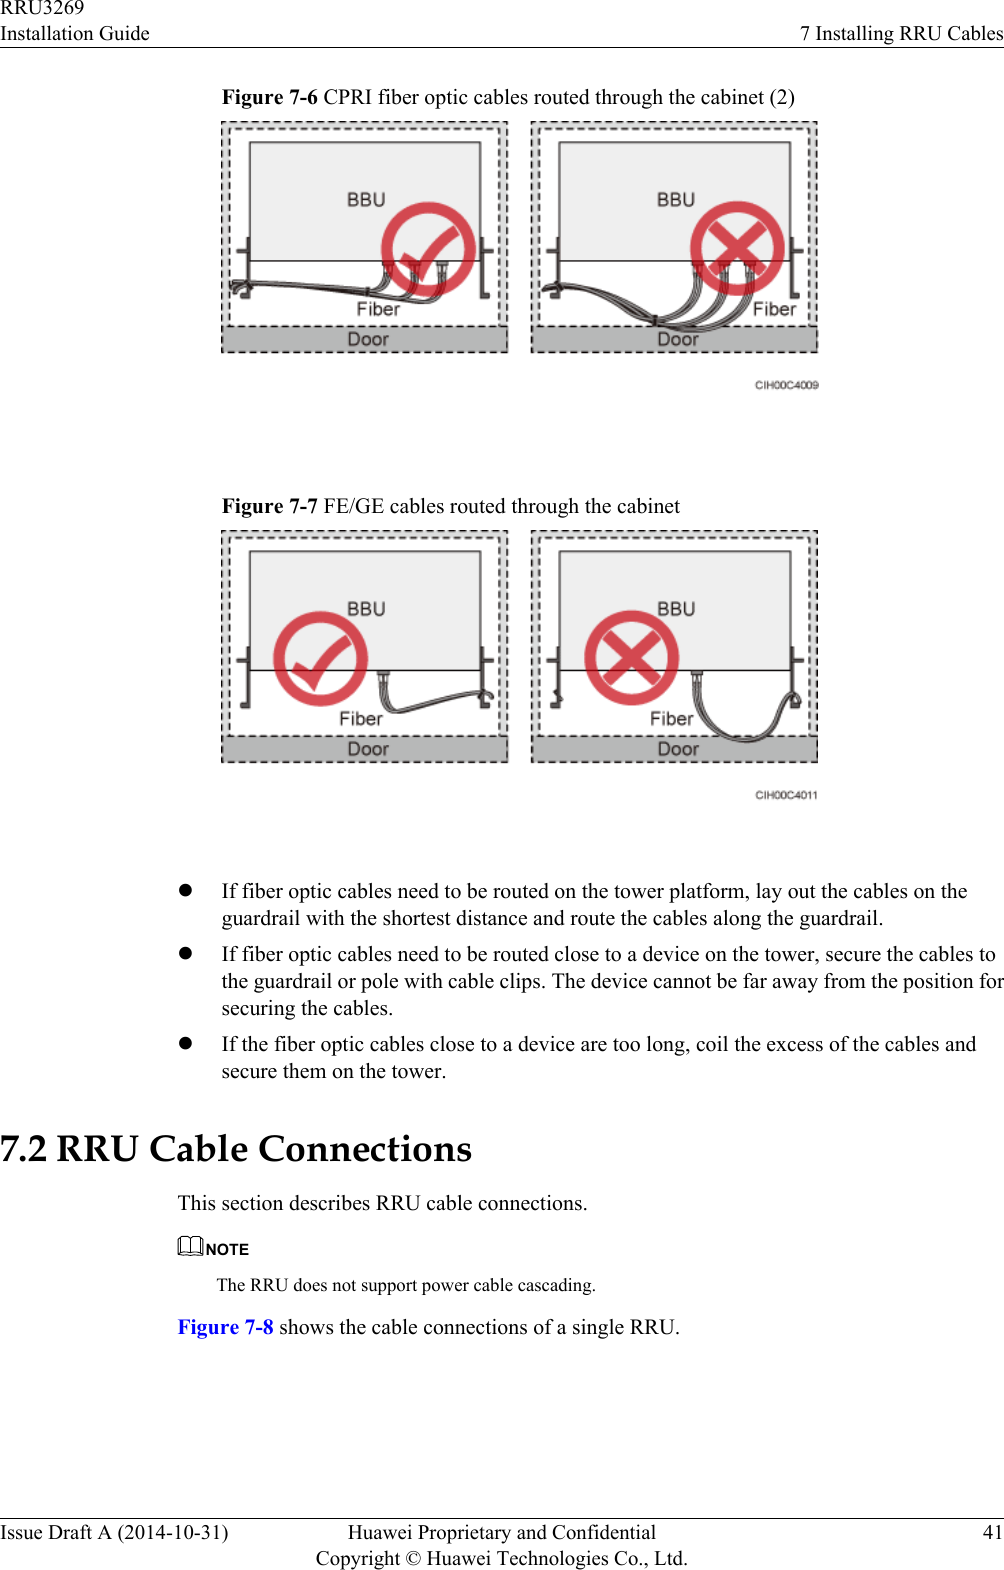 Figure 7-6 CPRI fiber optic cables routed through the cabinet (2) Figure 7-7 FE/GE cables routed through the cabinet lIf fiber optic cables need to be routed on the tower platform, lay out the cables on theguardrail with the shortest distance and route the cables along the guardrail.lIf fiber optic cables need to be routed close to a device on the tower, secure the cables tothe guardrail or pole with cable clips. The device cannot be far away from the position forsecuring the cables.lIf the fiber optic cables close to a device are too long, coil the excess of the cables andsecure them on the tower.7.2 RRU Cable ConnectionsThis section describes RRU cable connections.NOTEThe RRU does not support power cable cascading.Figure 7-8 shows the cable connections of a single RRU.RRU3269Installation Guide 7 Installing RRU CablesIssue Draft A (2014-10-31) Huawei Proprietary and ConfidentialCopyright © Huawei Technologies Co., Ltd.41